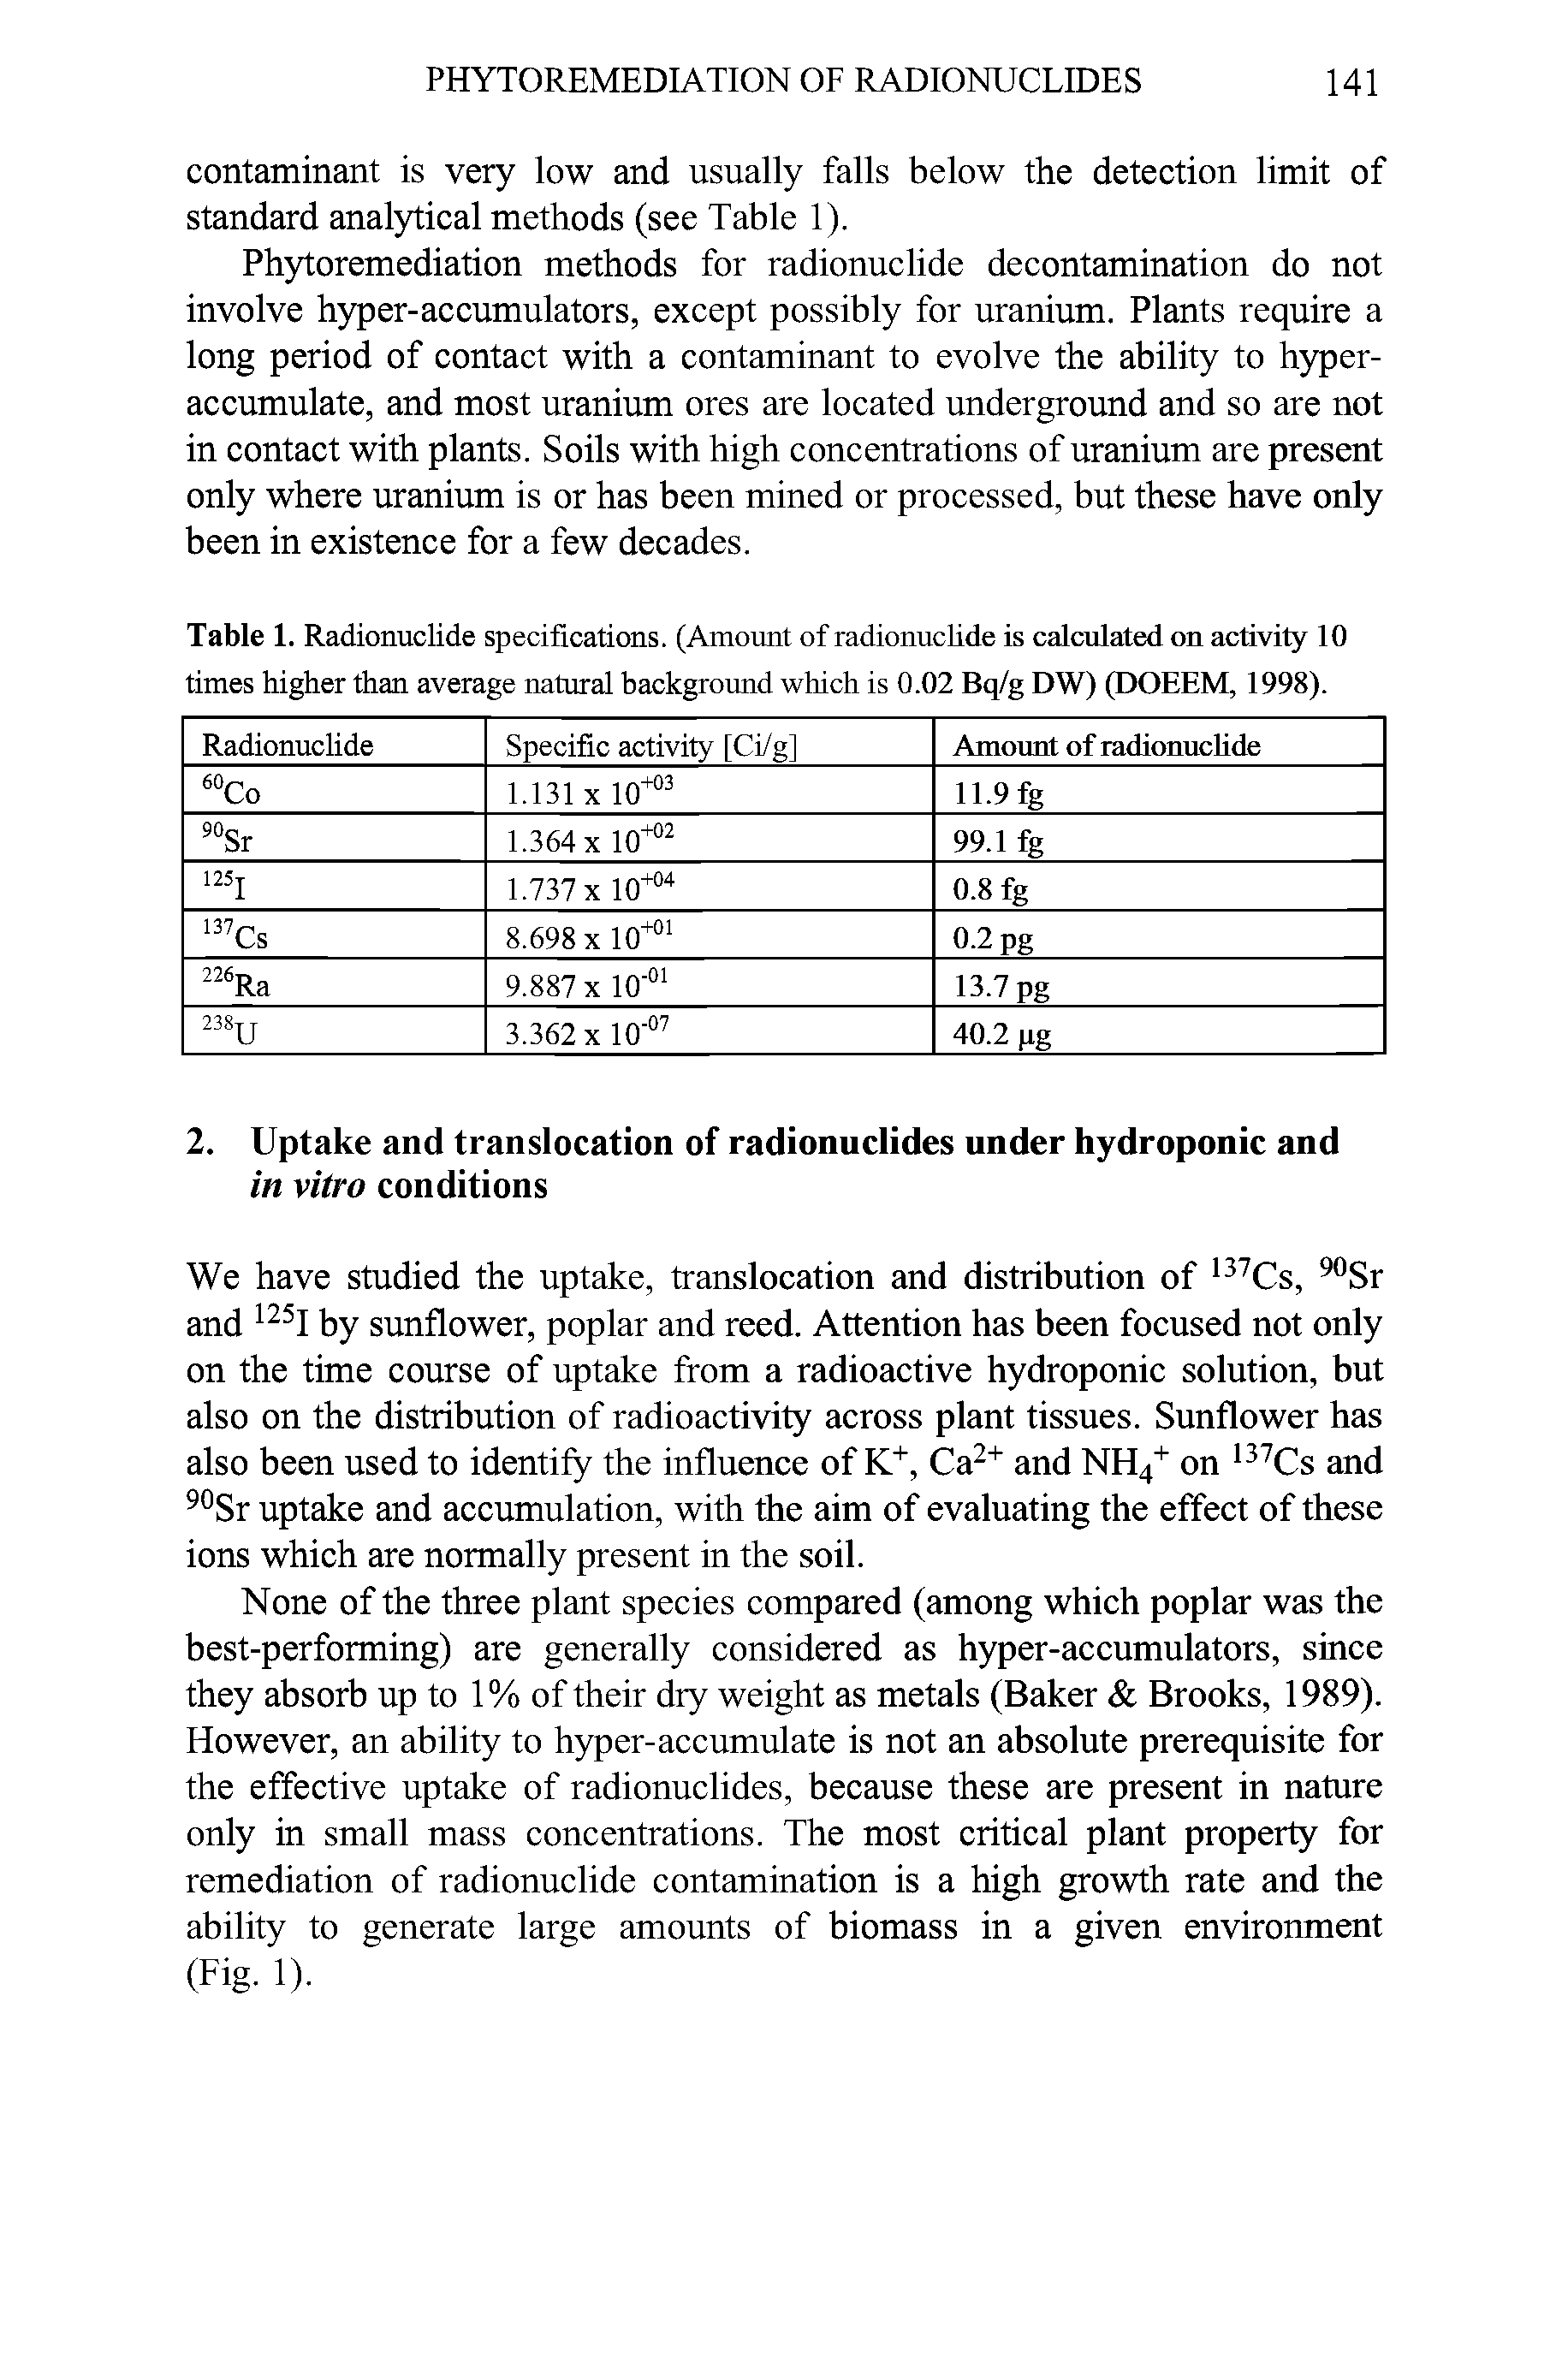 Table 1. Radionuclide specifications. (Amount of radionuclide is calculated on activity 10 times higher than average natural background which is 0.02 Bq/g DW) (DOEEM, 1998).